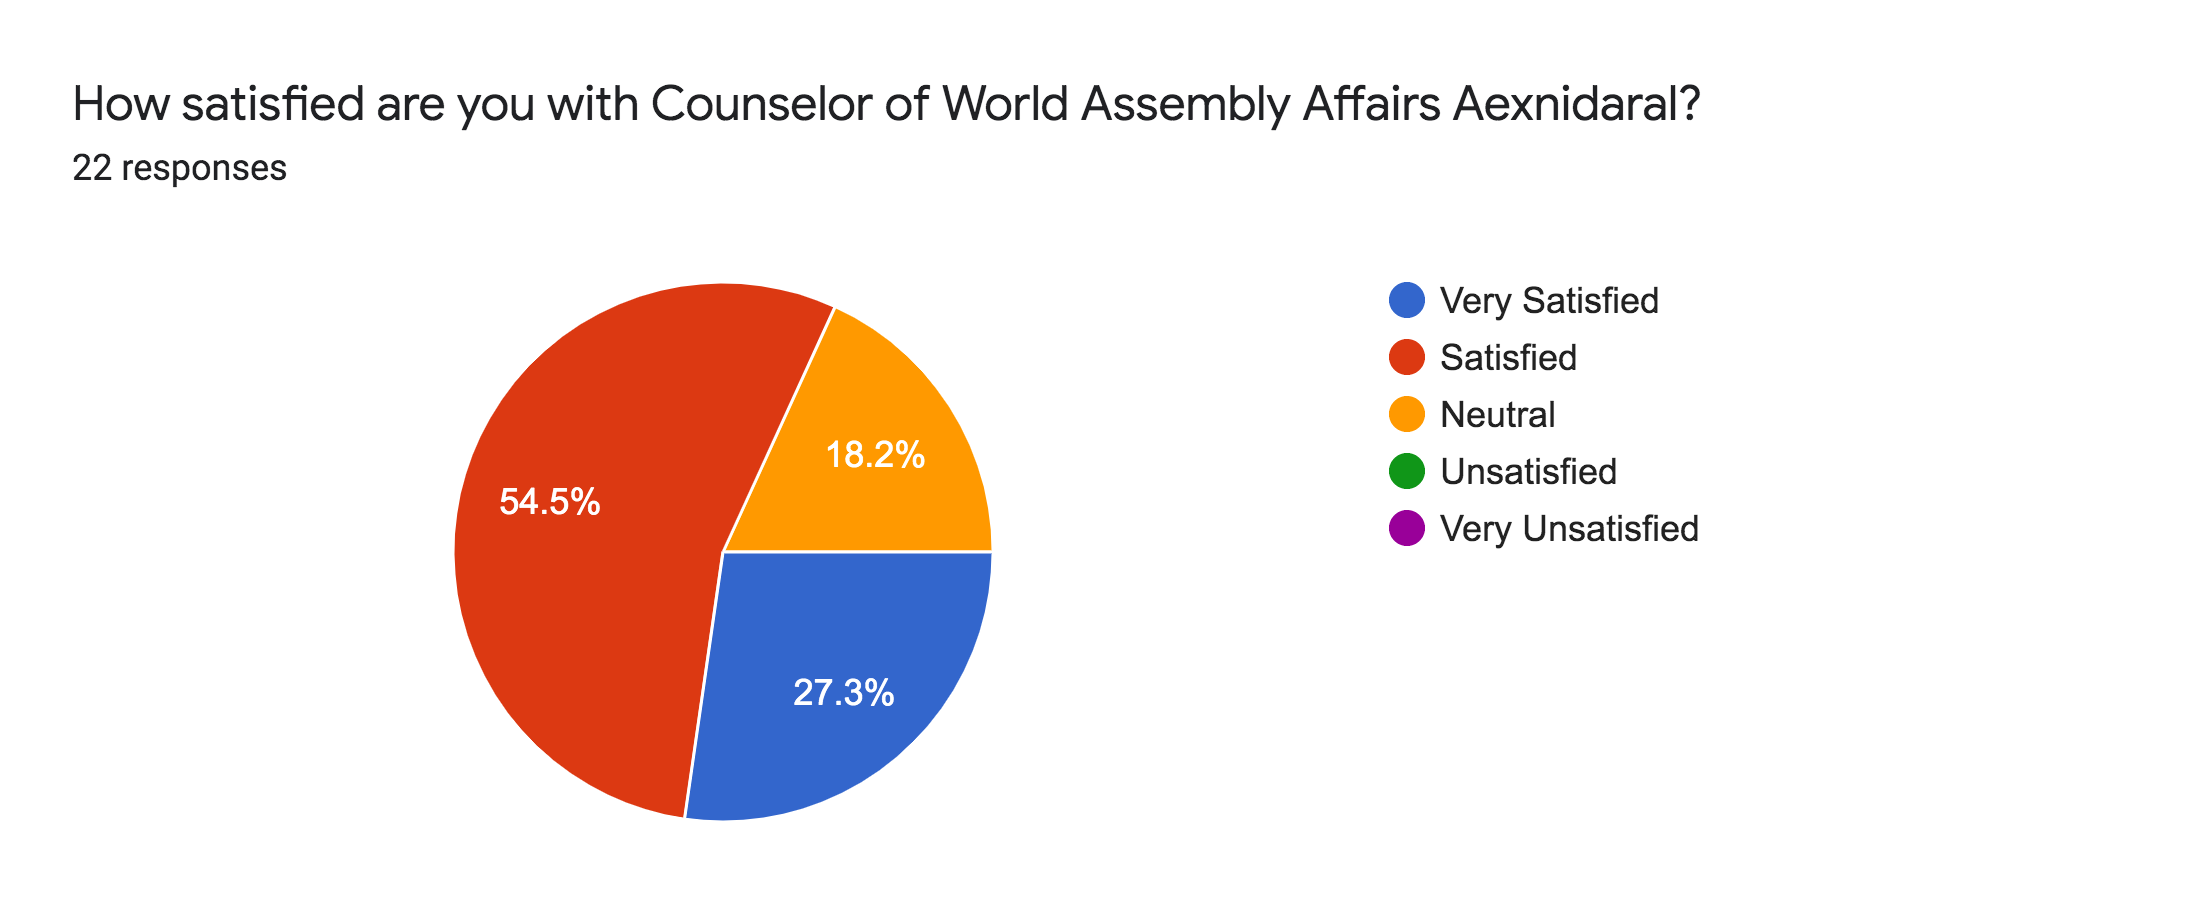 Forms response chart. Question title: How satisfied are you with Counselor of World Assembly Affairs Aexnidaral?. Number of responses: 22 responses.